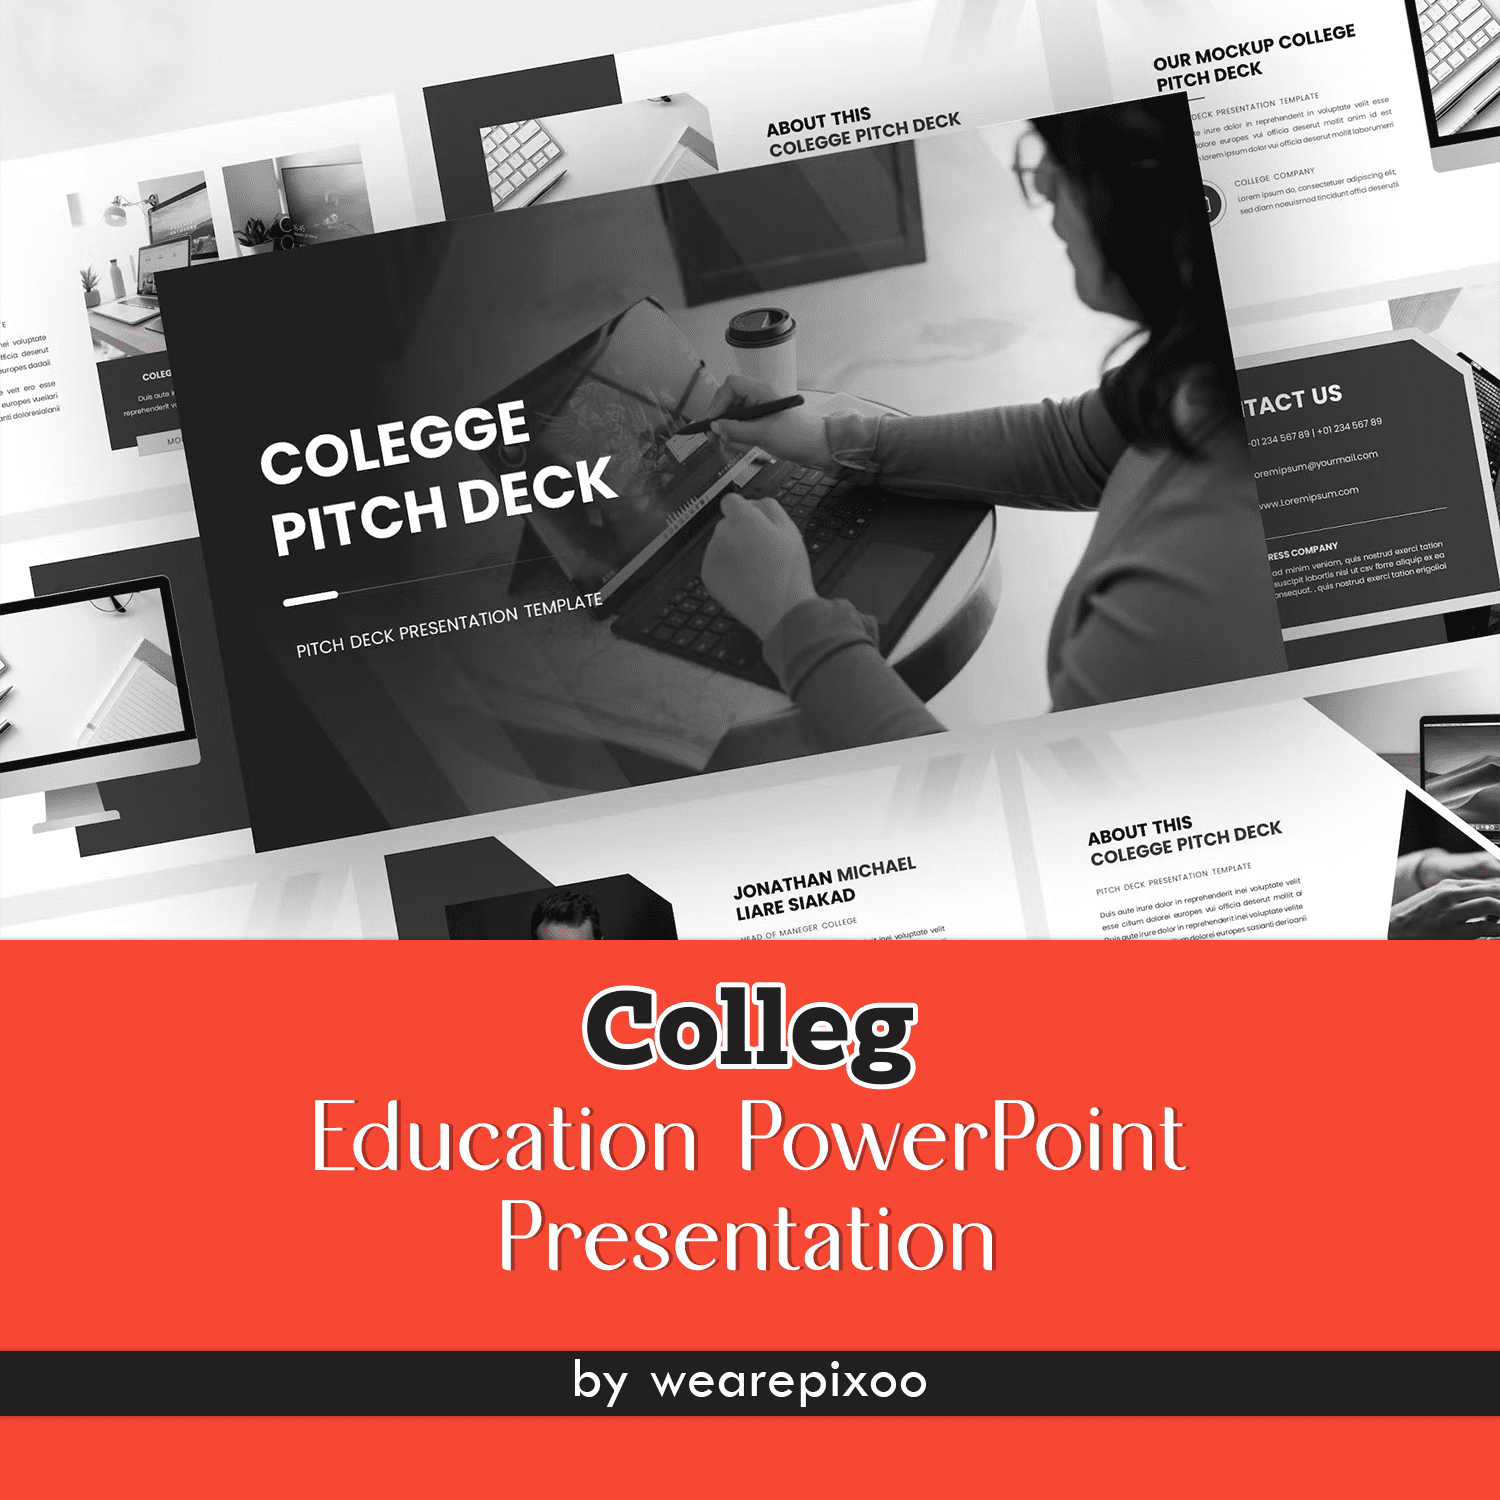 College Pitch Deck Powerpoint Template - main image preview.